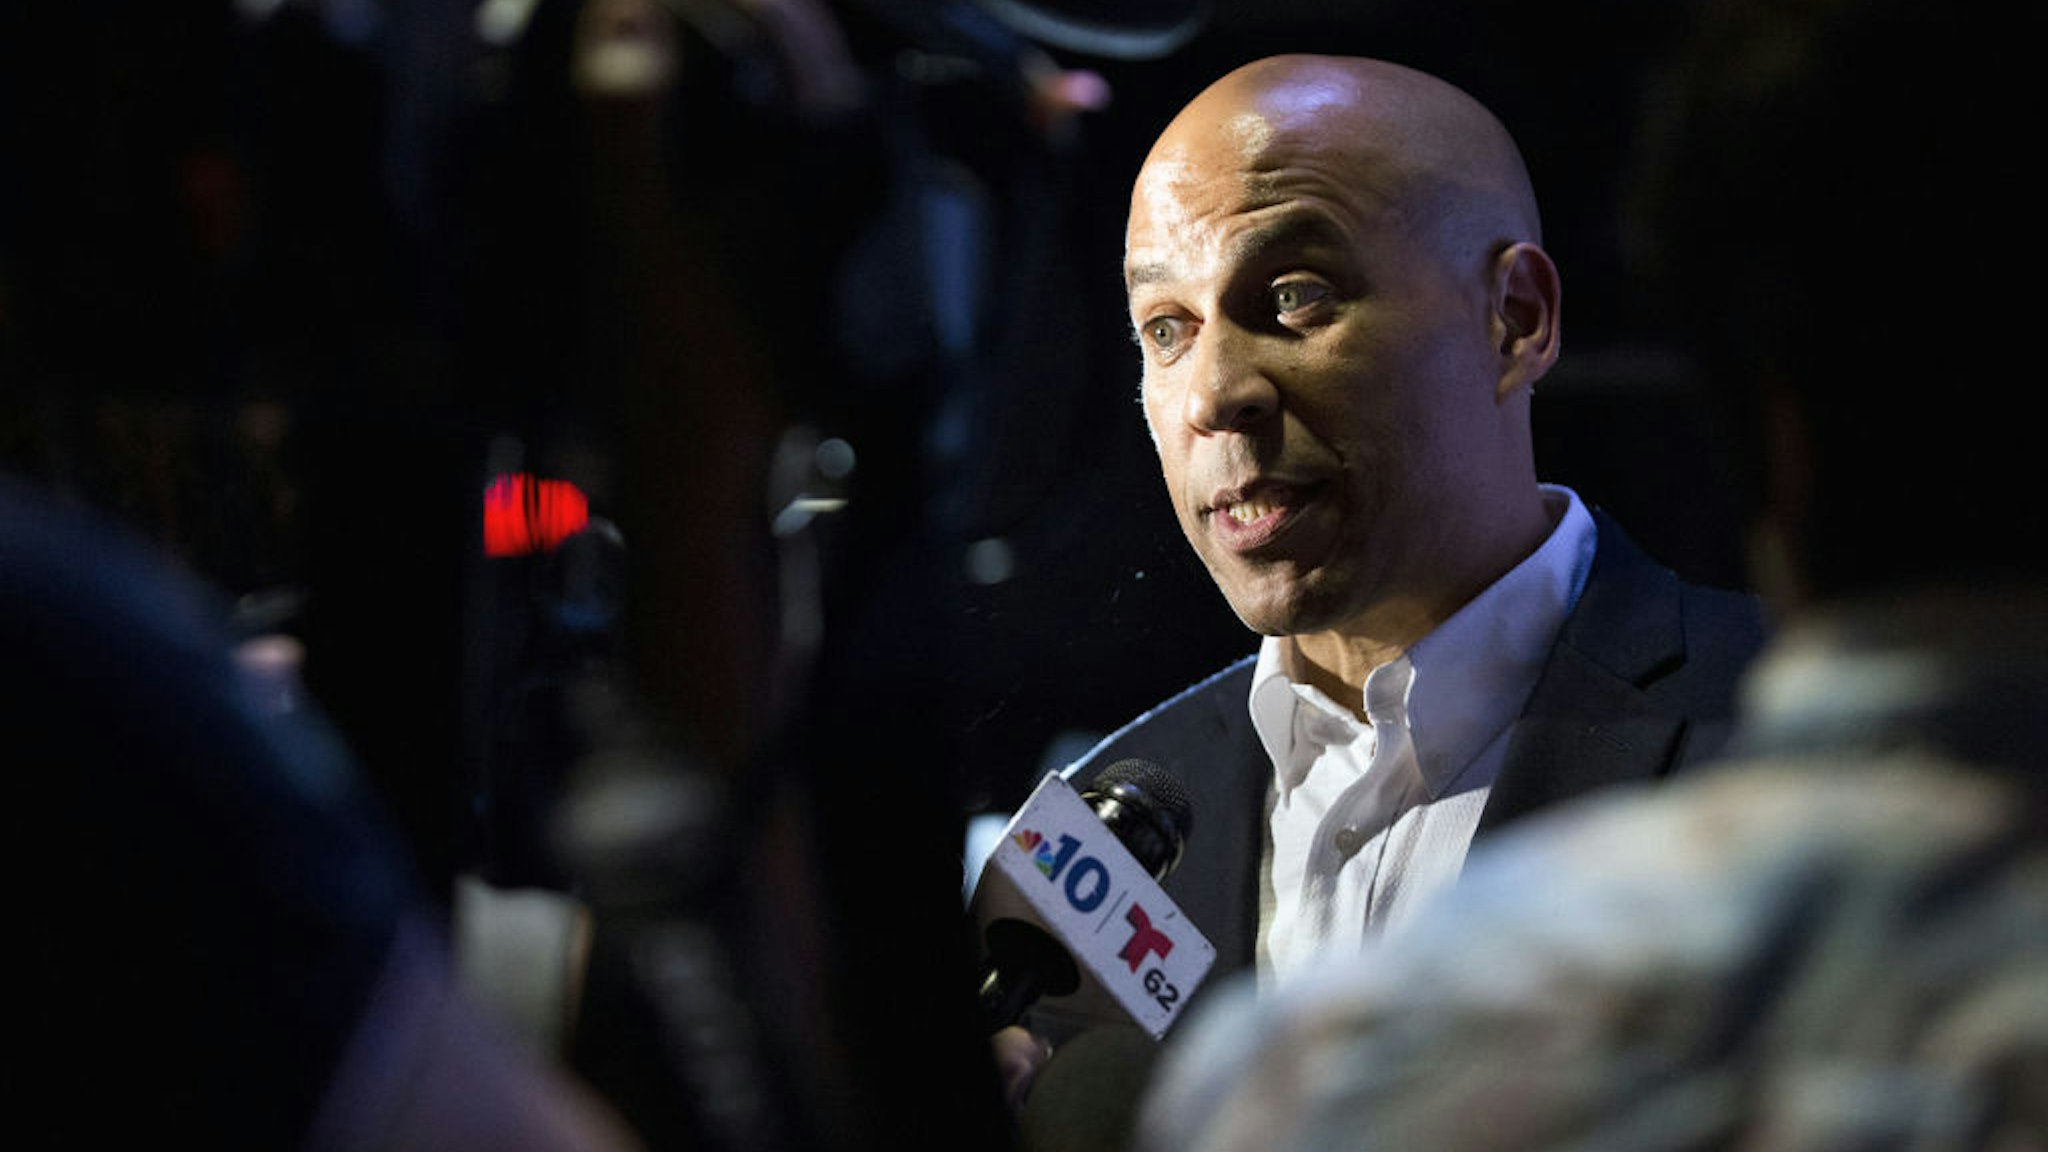 Senator Cory Booker, a Democrat from New Jersey and 2020 presidential candidate, speaks to members of the media during a campaign stop in Philadelphia, Pennsylvania, U.S., on Wednesday, Aug. 7, 2019.